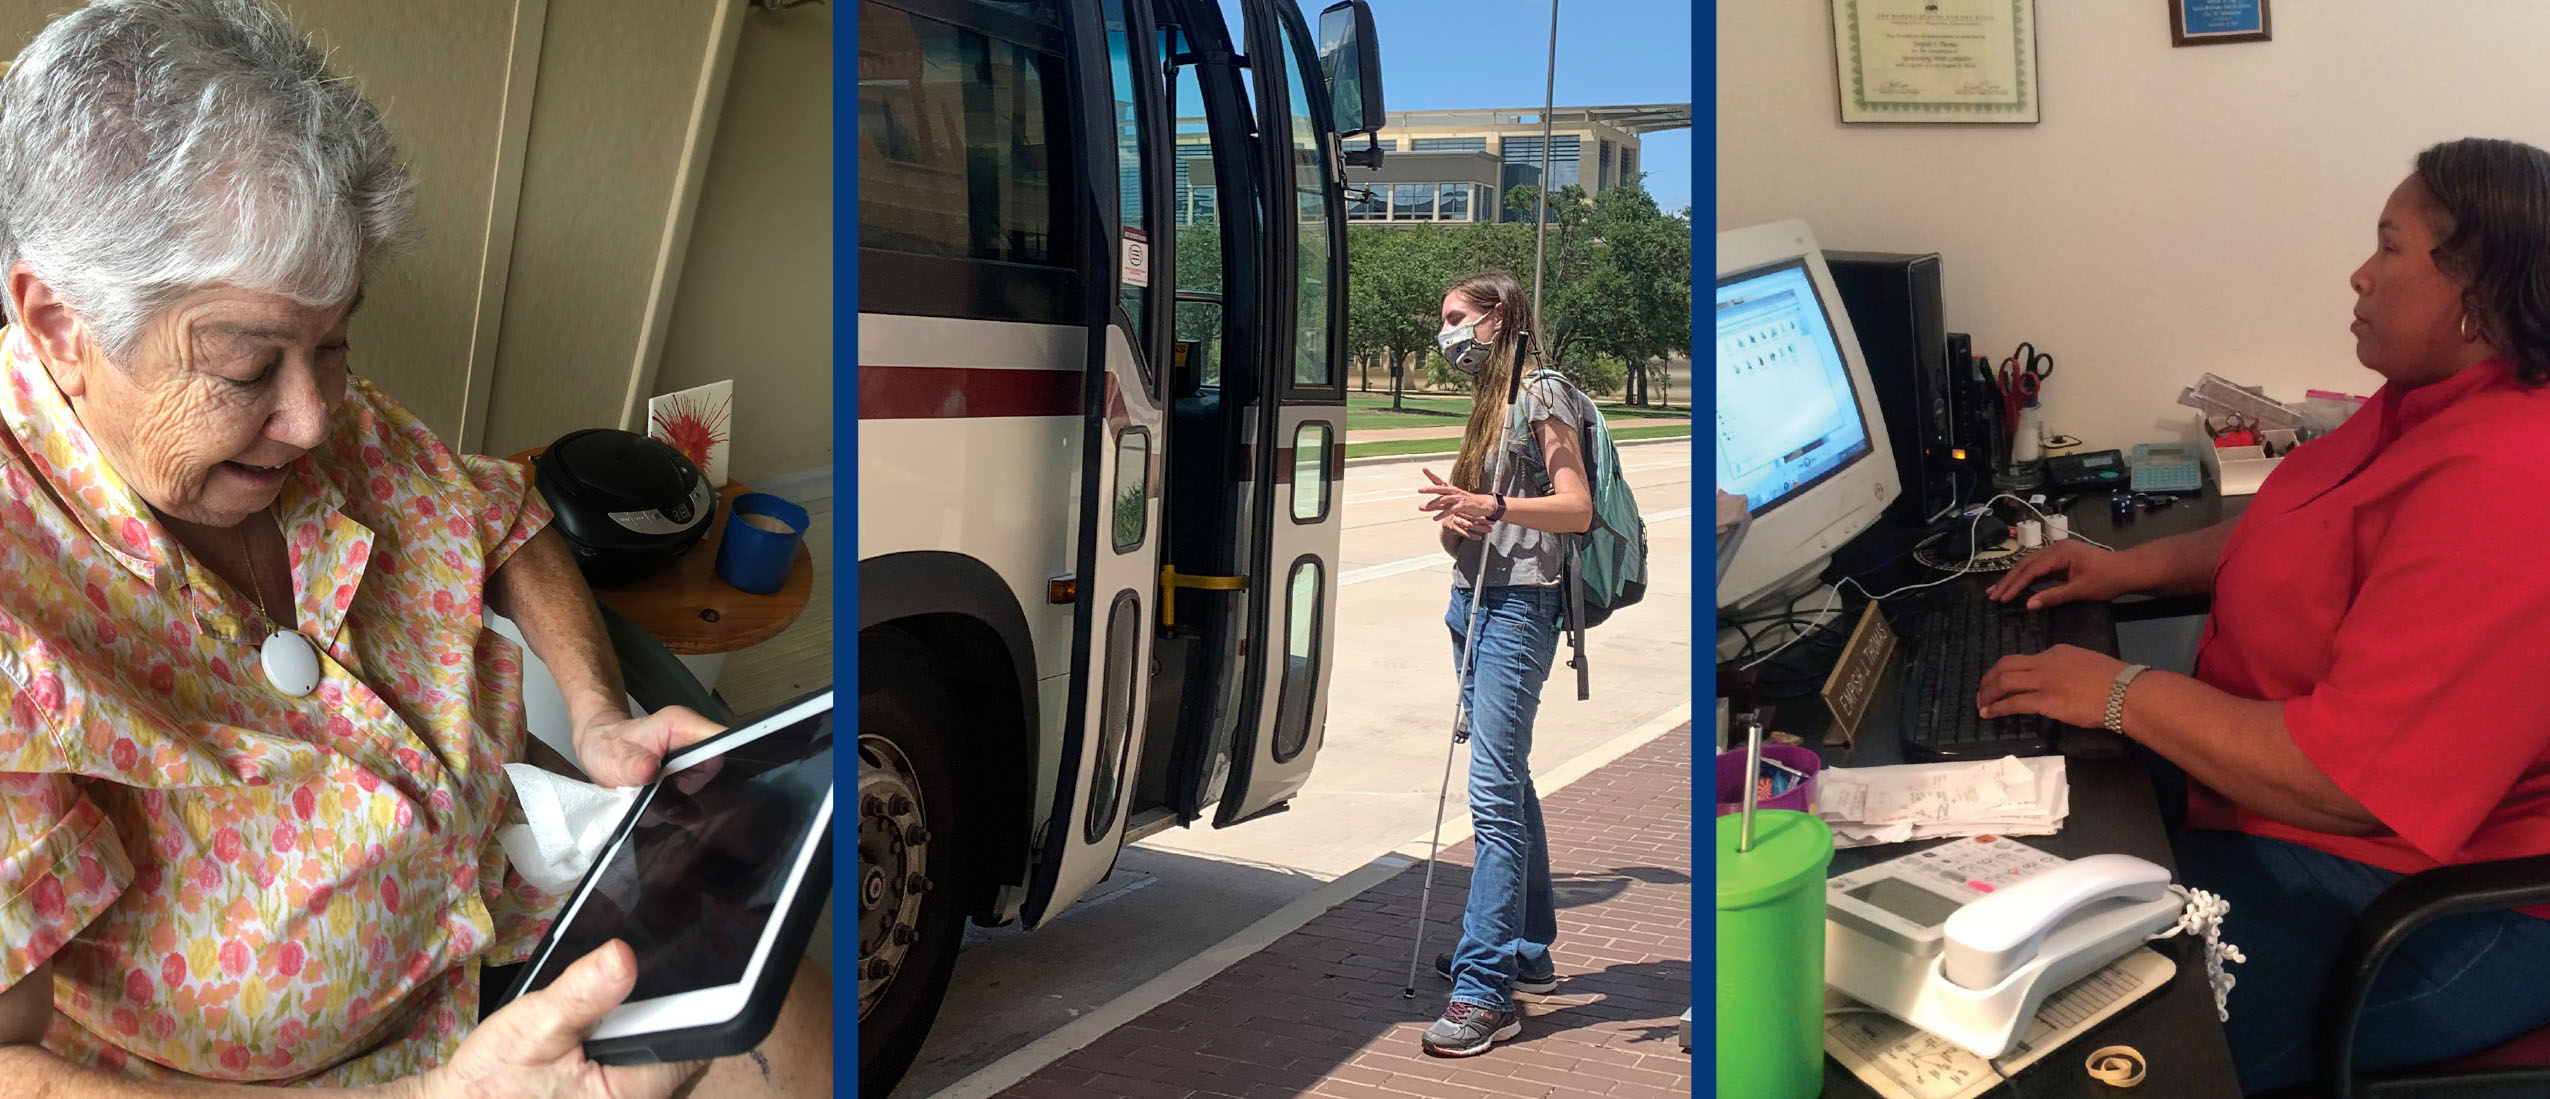 A collage of three photos: an older White woman using a tablet at home, a younger White woman with a white cane boarding a public bus, and a middle aged Black woman using computer access technology at work.